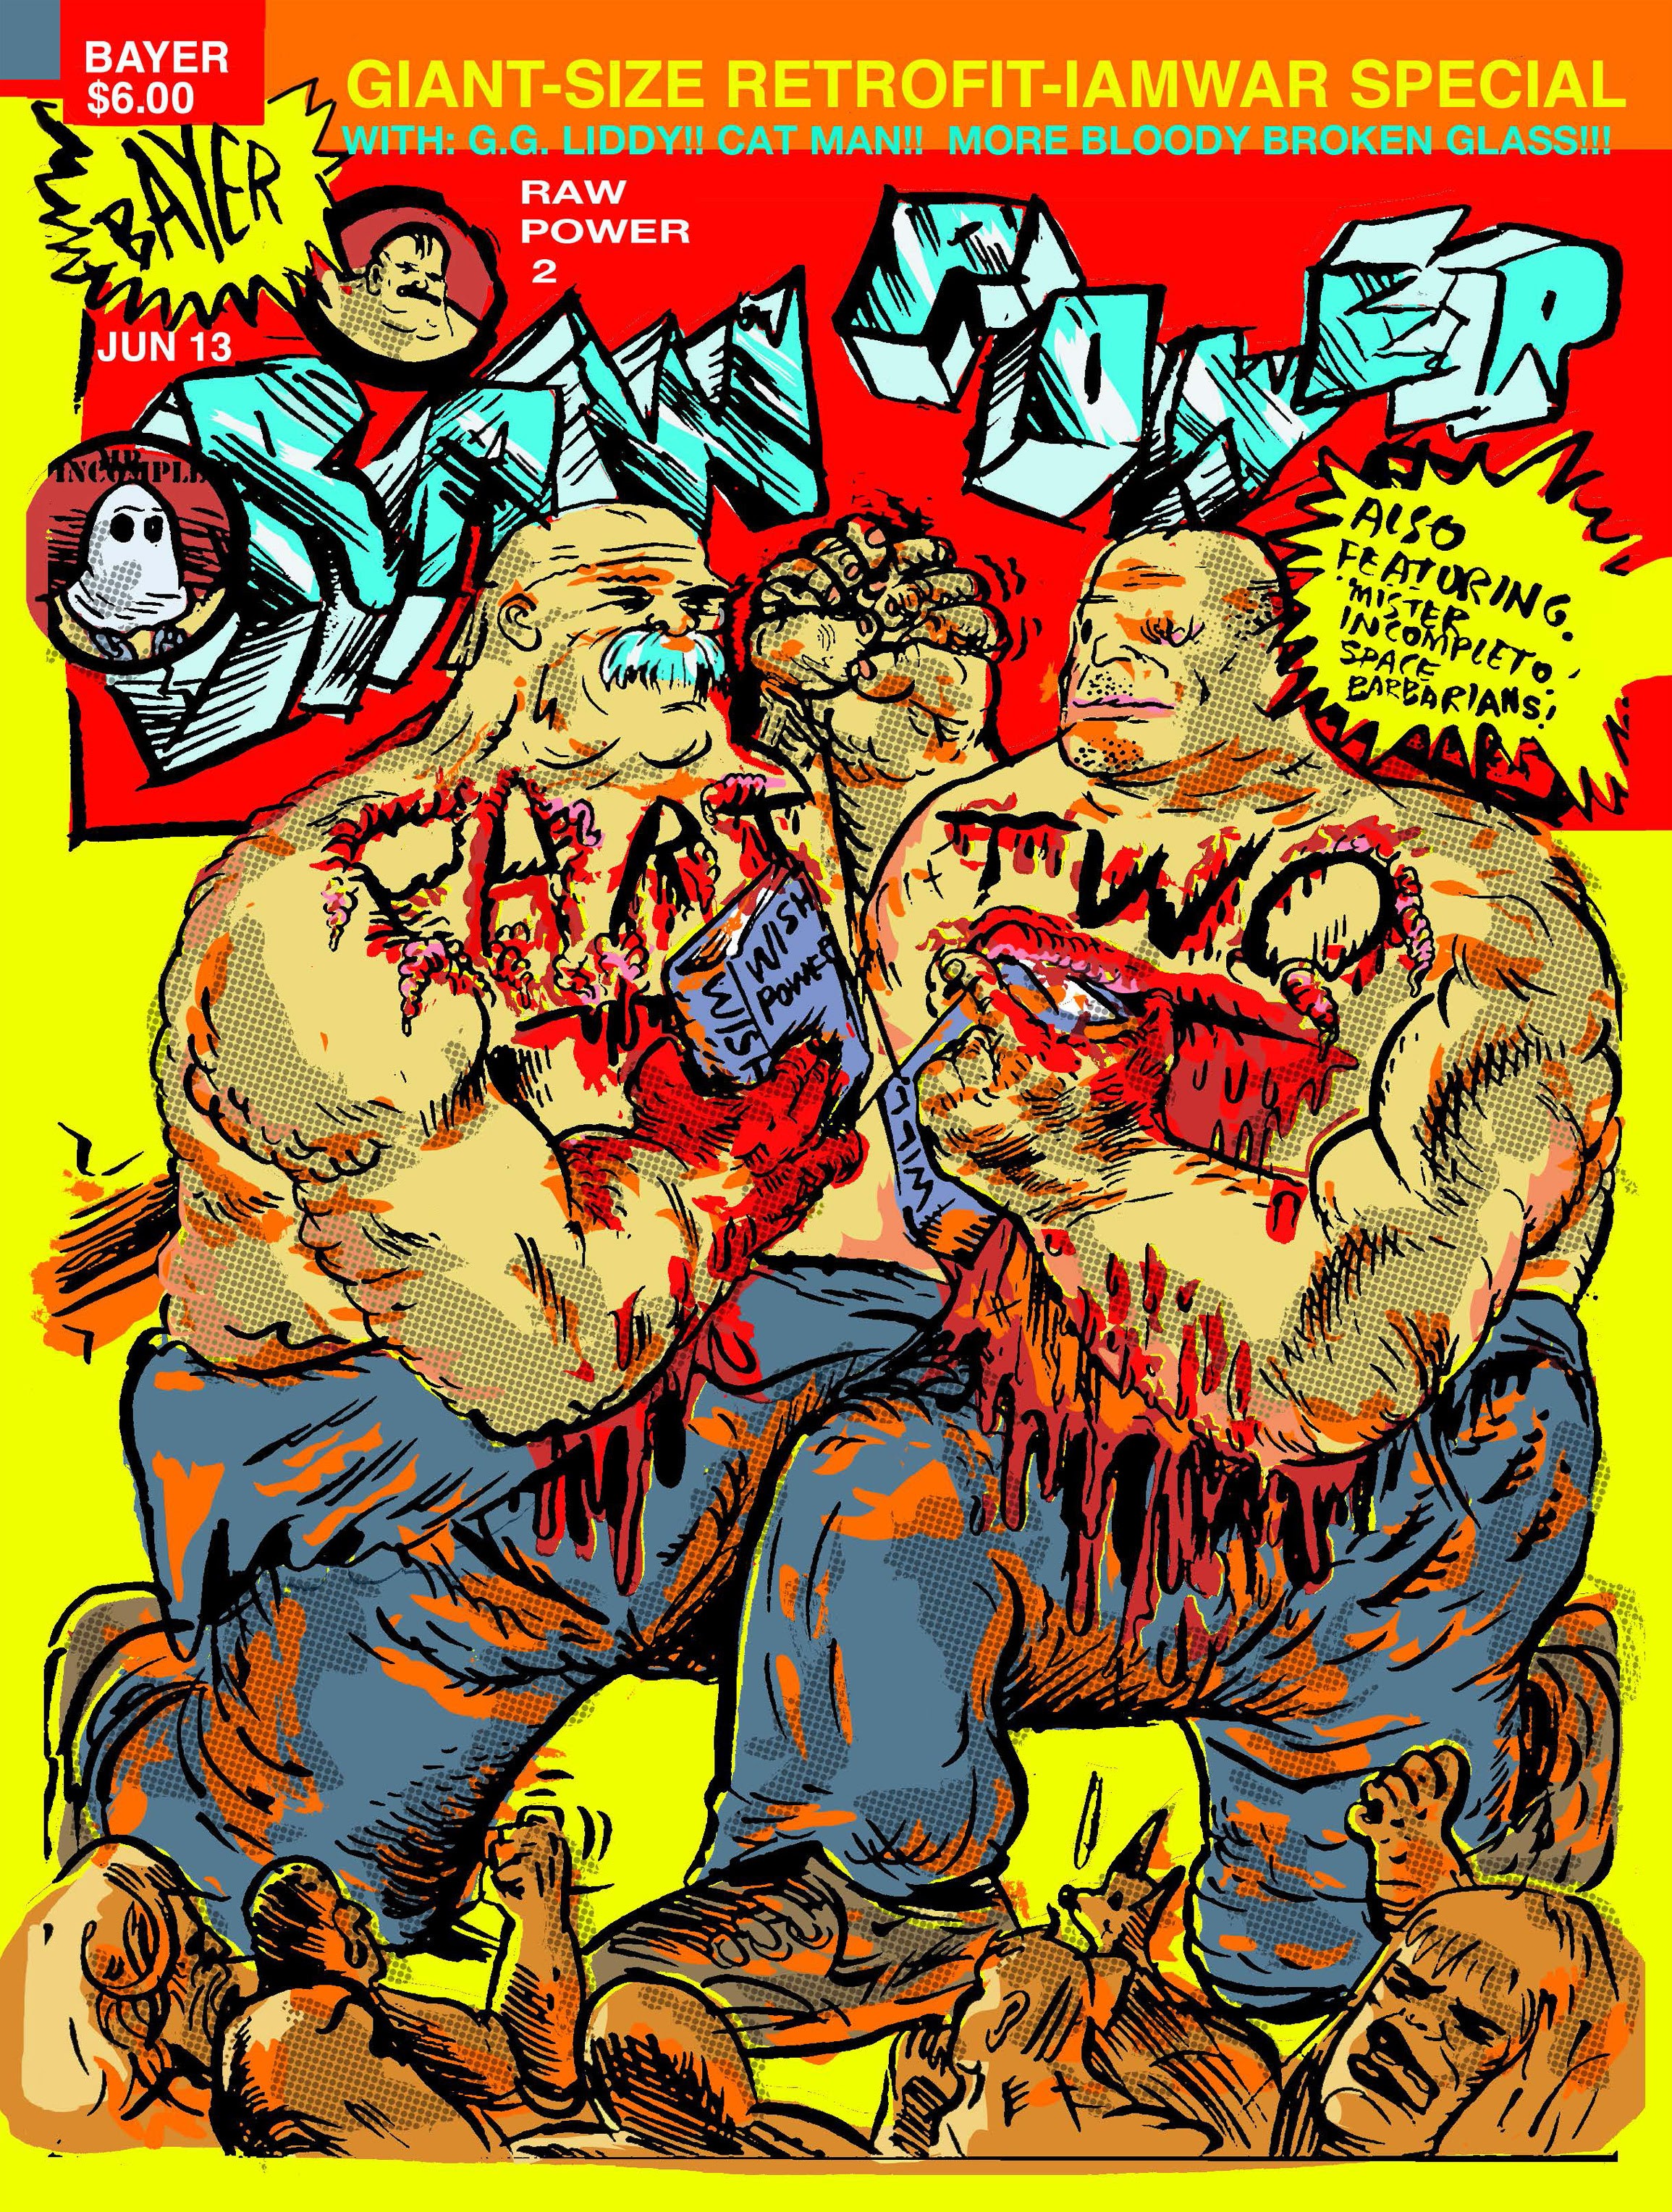 Read online Raw Power comic -  Issue #2 - 1